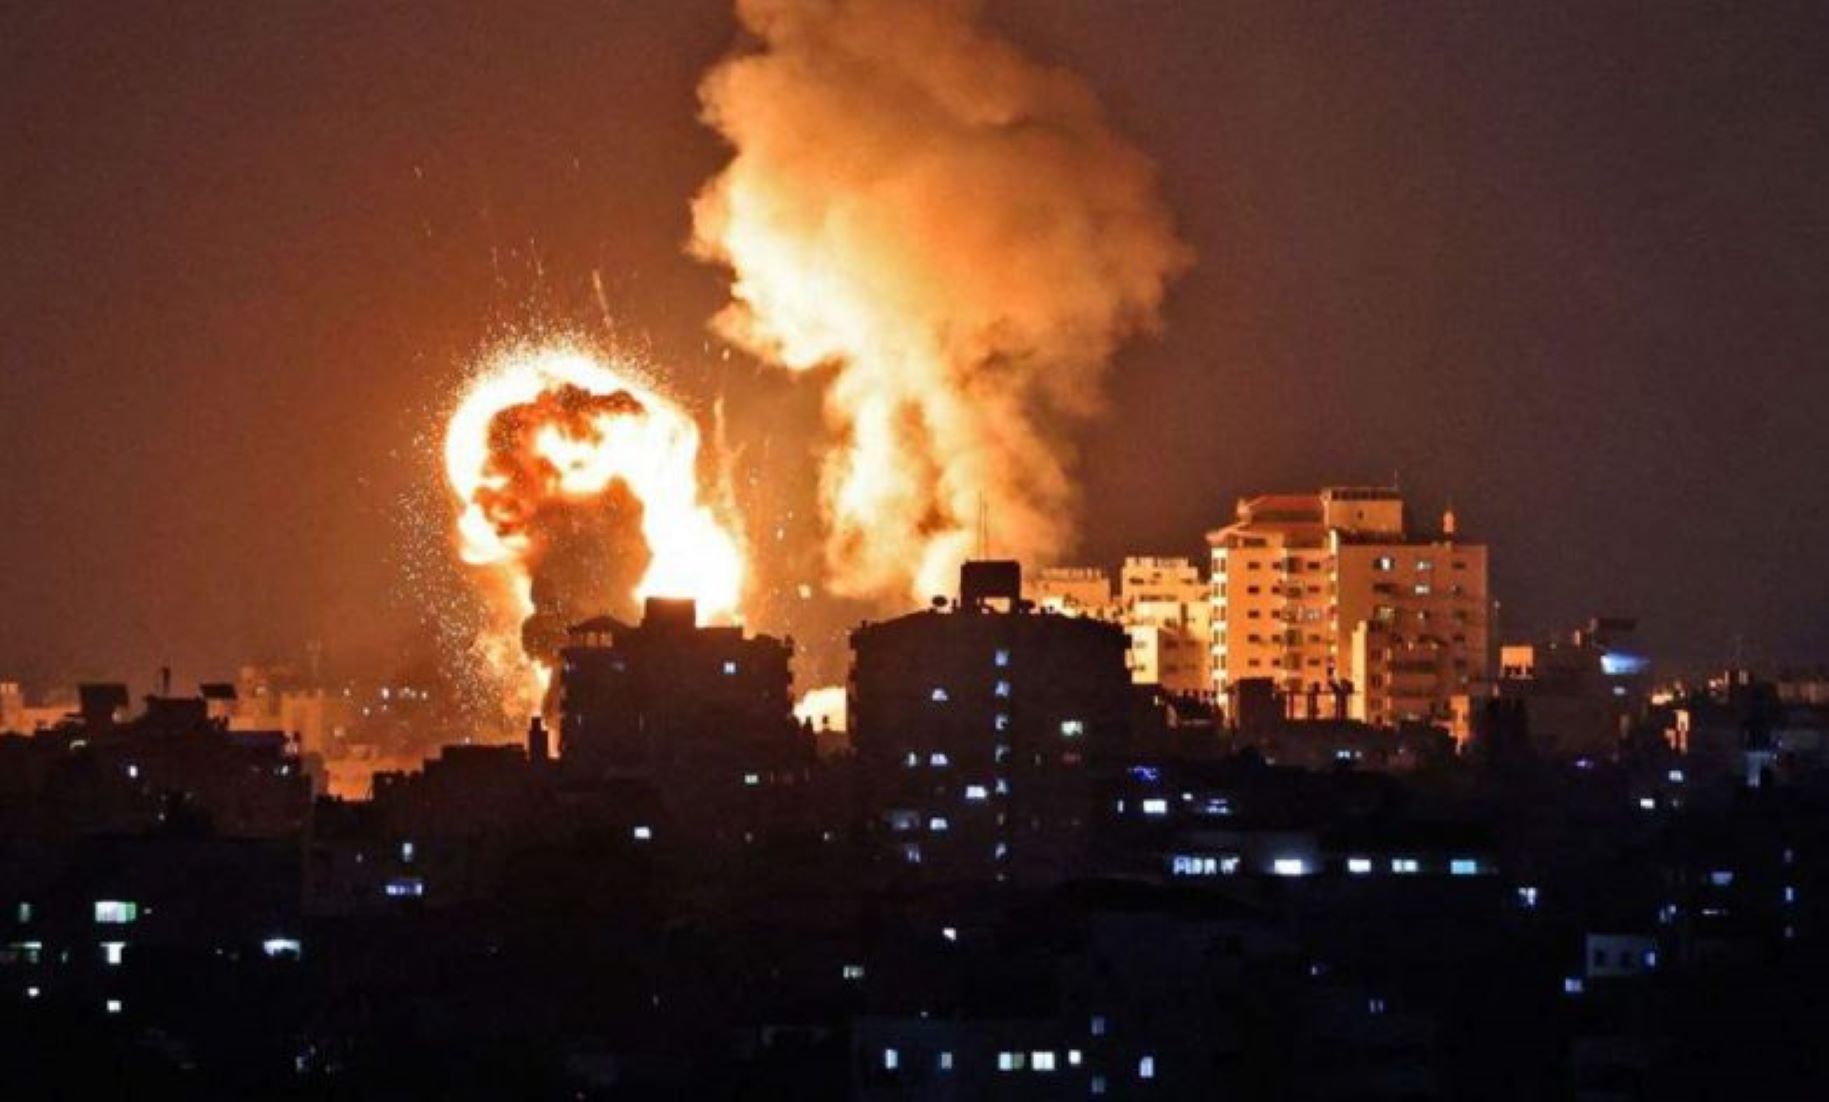 Palestinian Death Toll From Israeli Airstrikes On Gaza Today Rises To 15